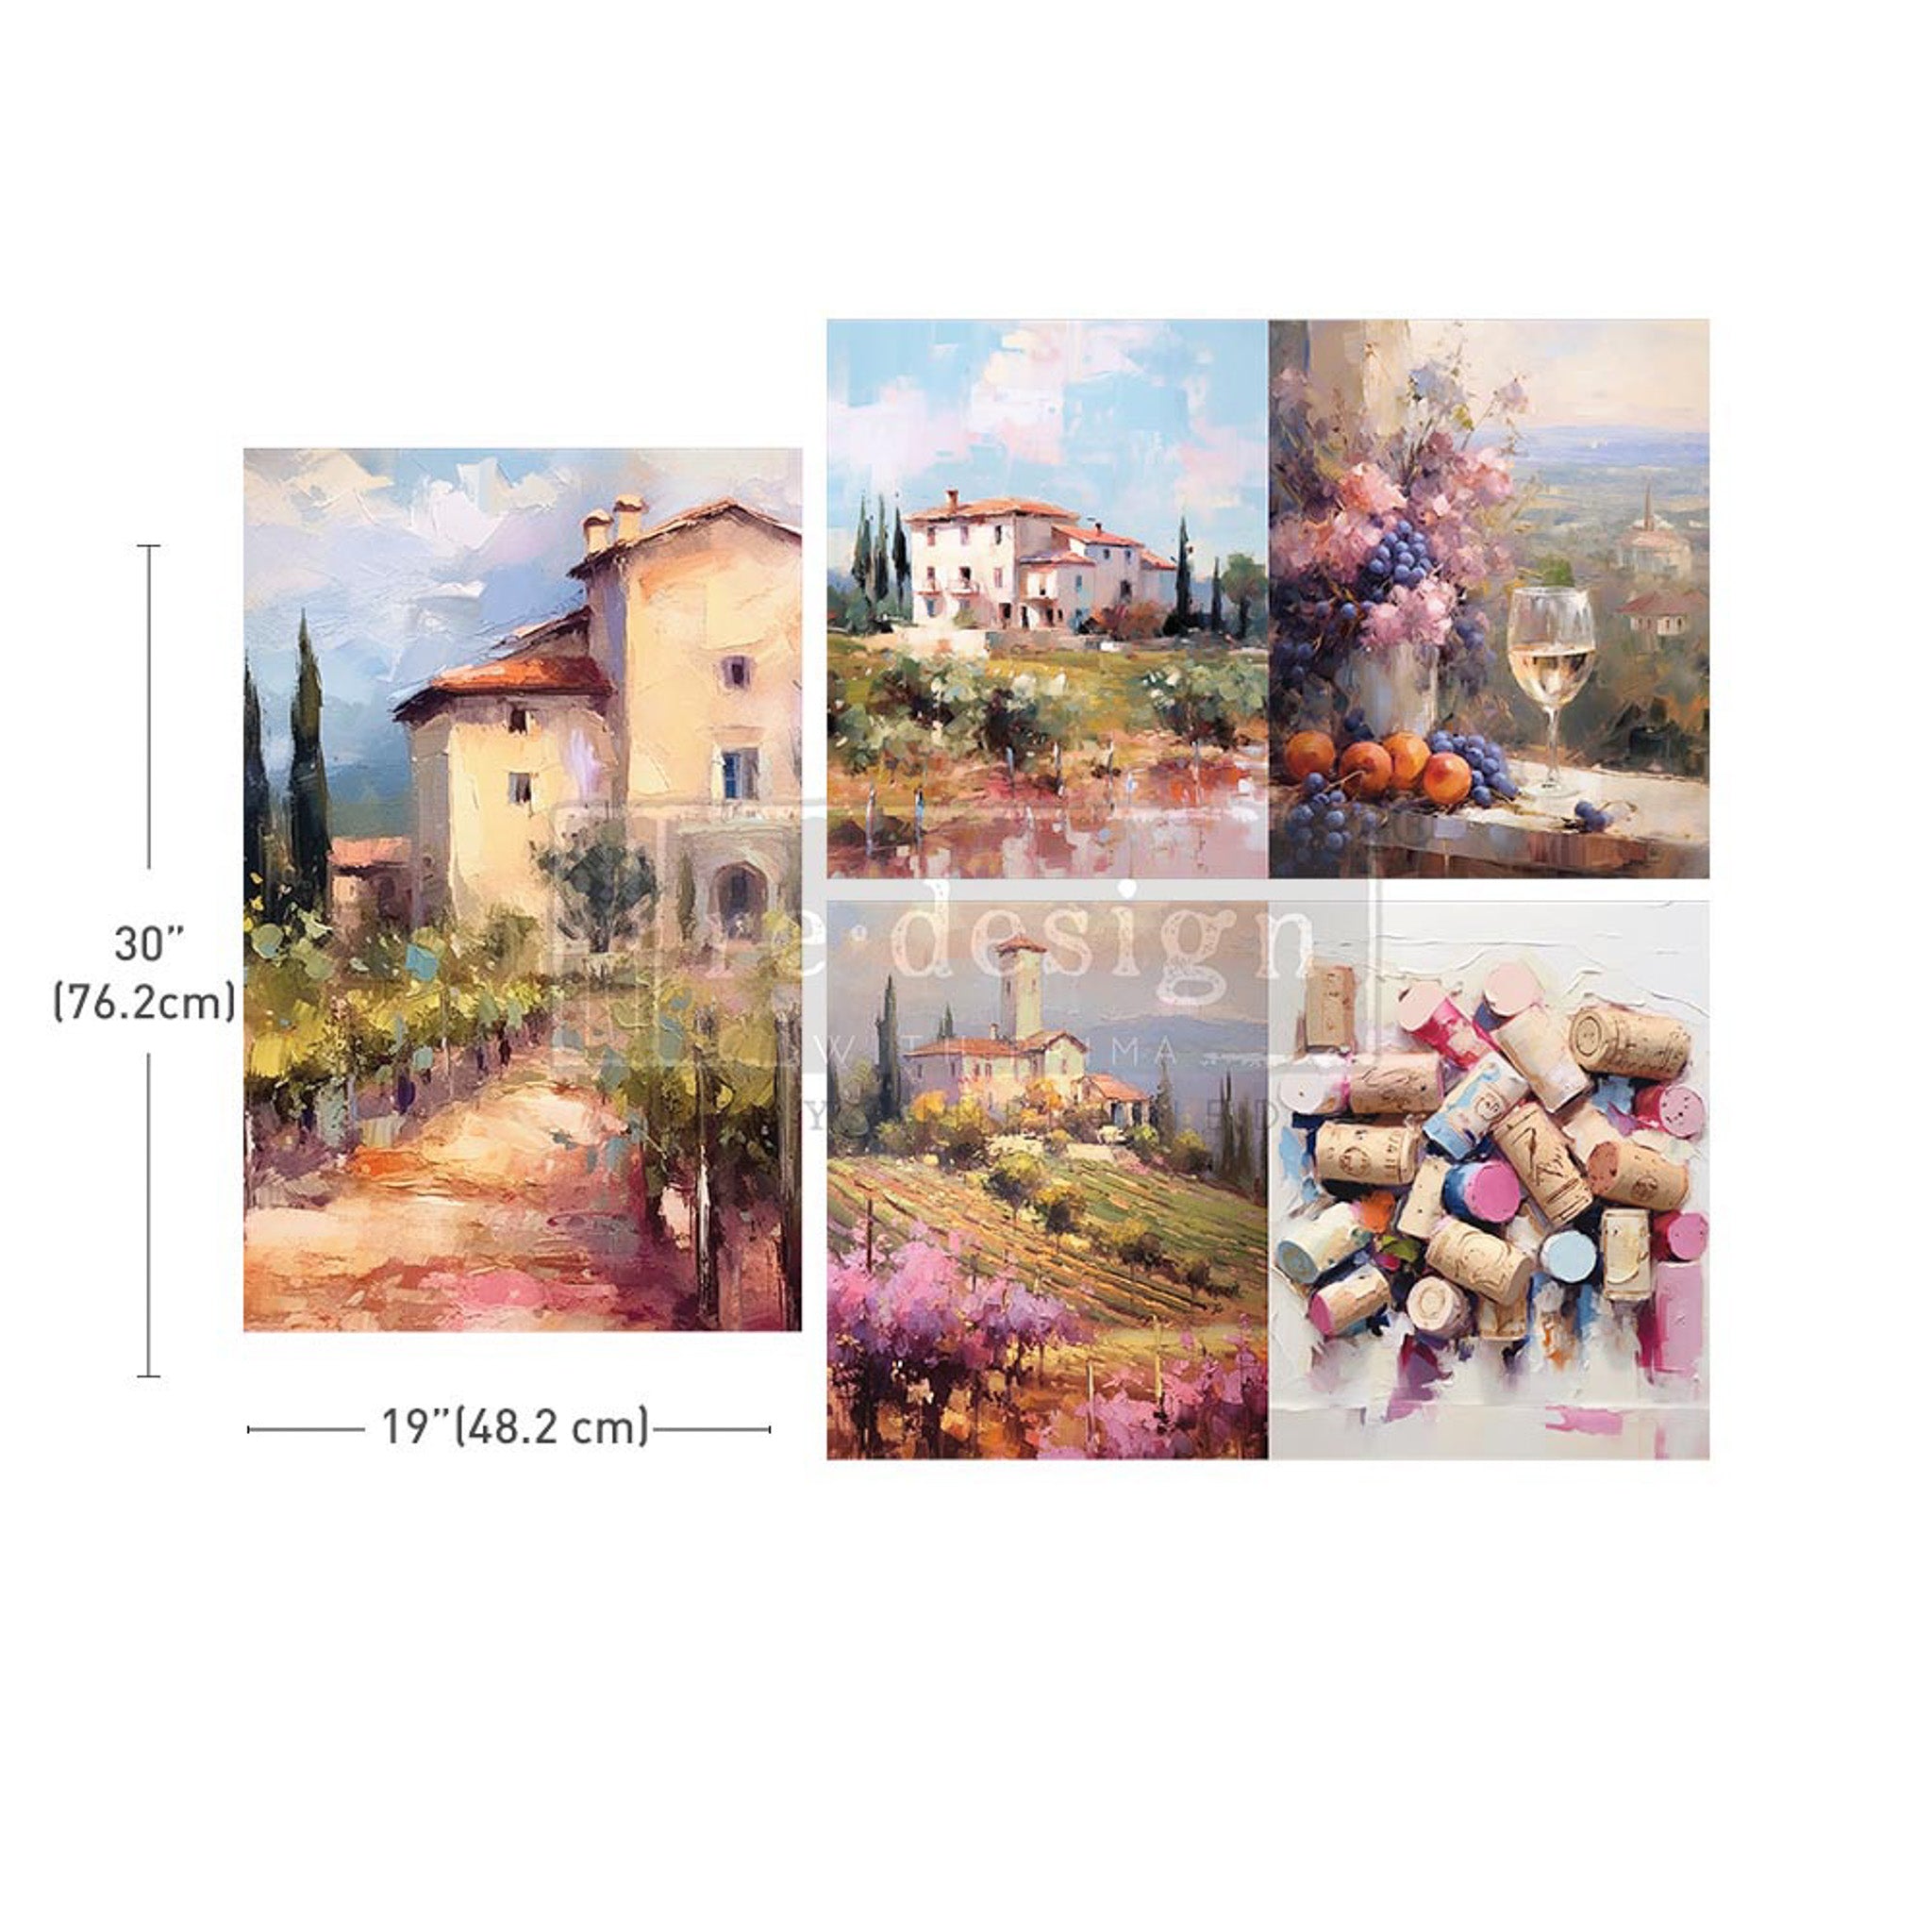 A white background with 3 tissue paper sheets that feature 5 stunning watercolor designs featuring Tuscan scenery and wine glasses and corks. Measurements for 1 sheet reads: 30" (76.2 cm) by 19" (48.2 cm).